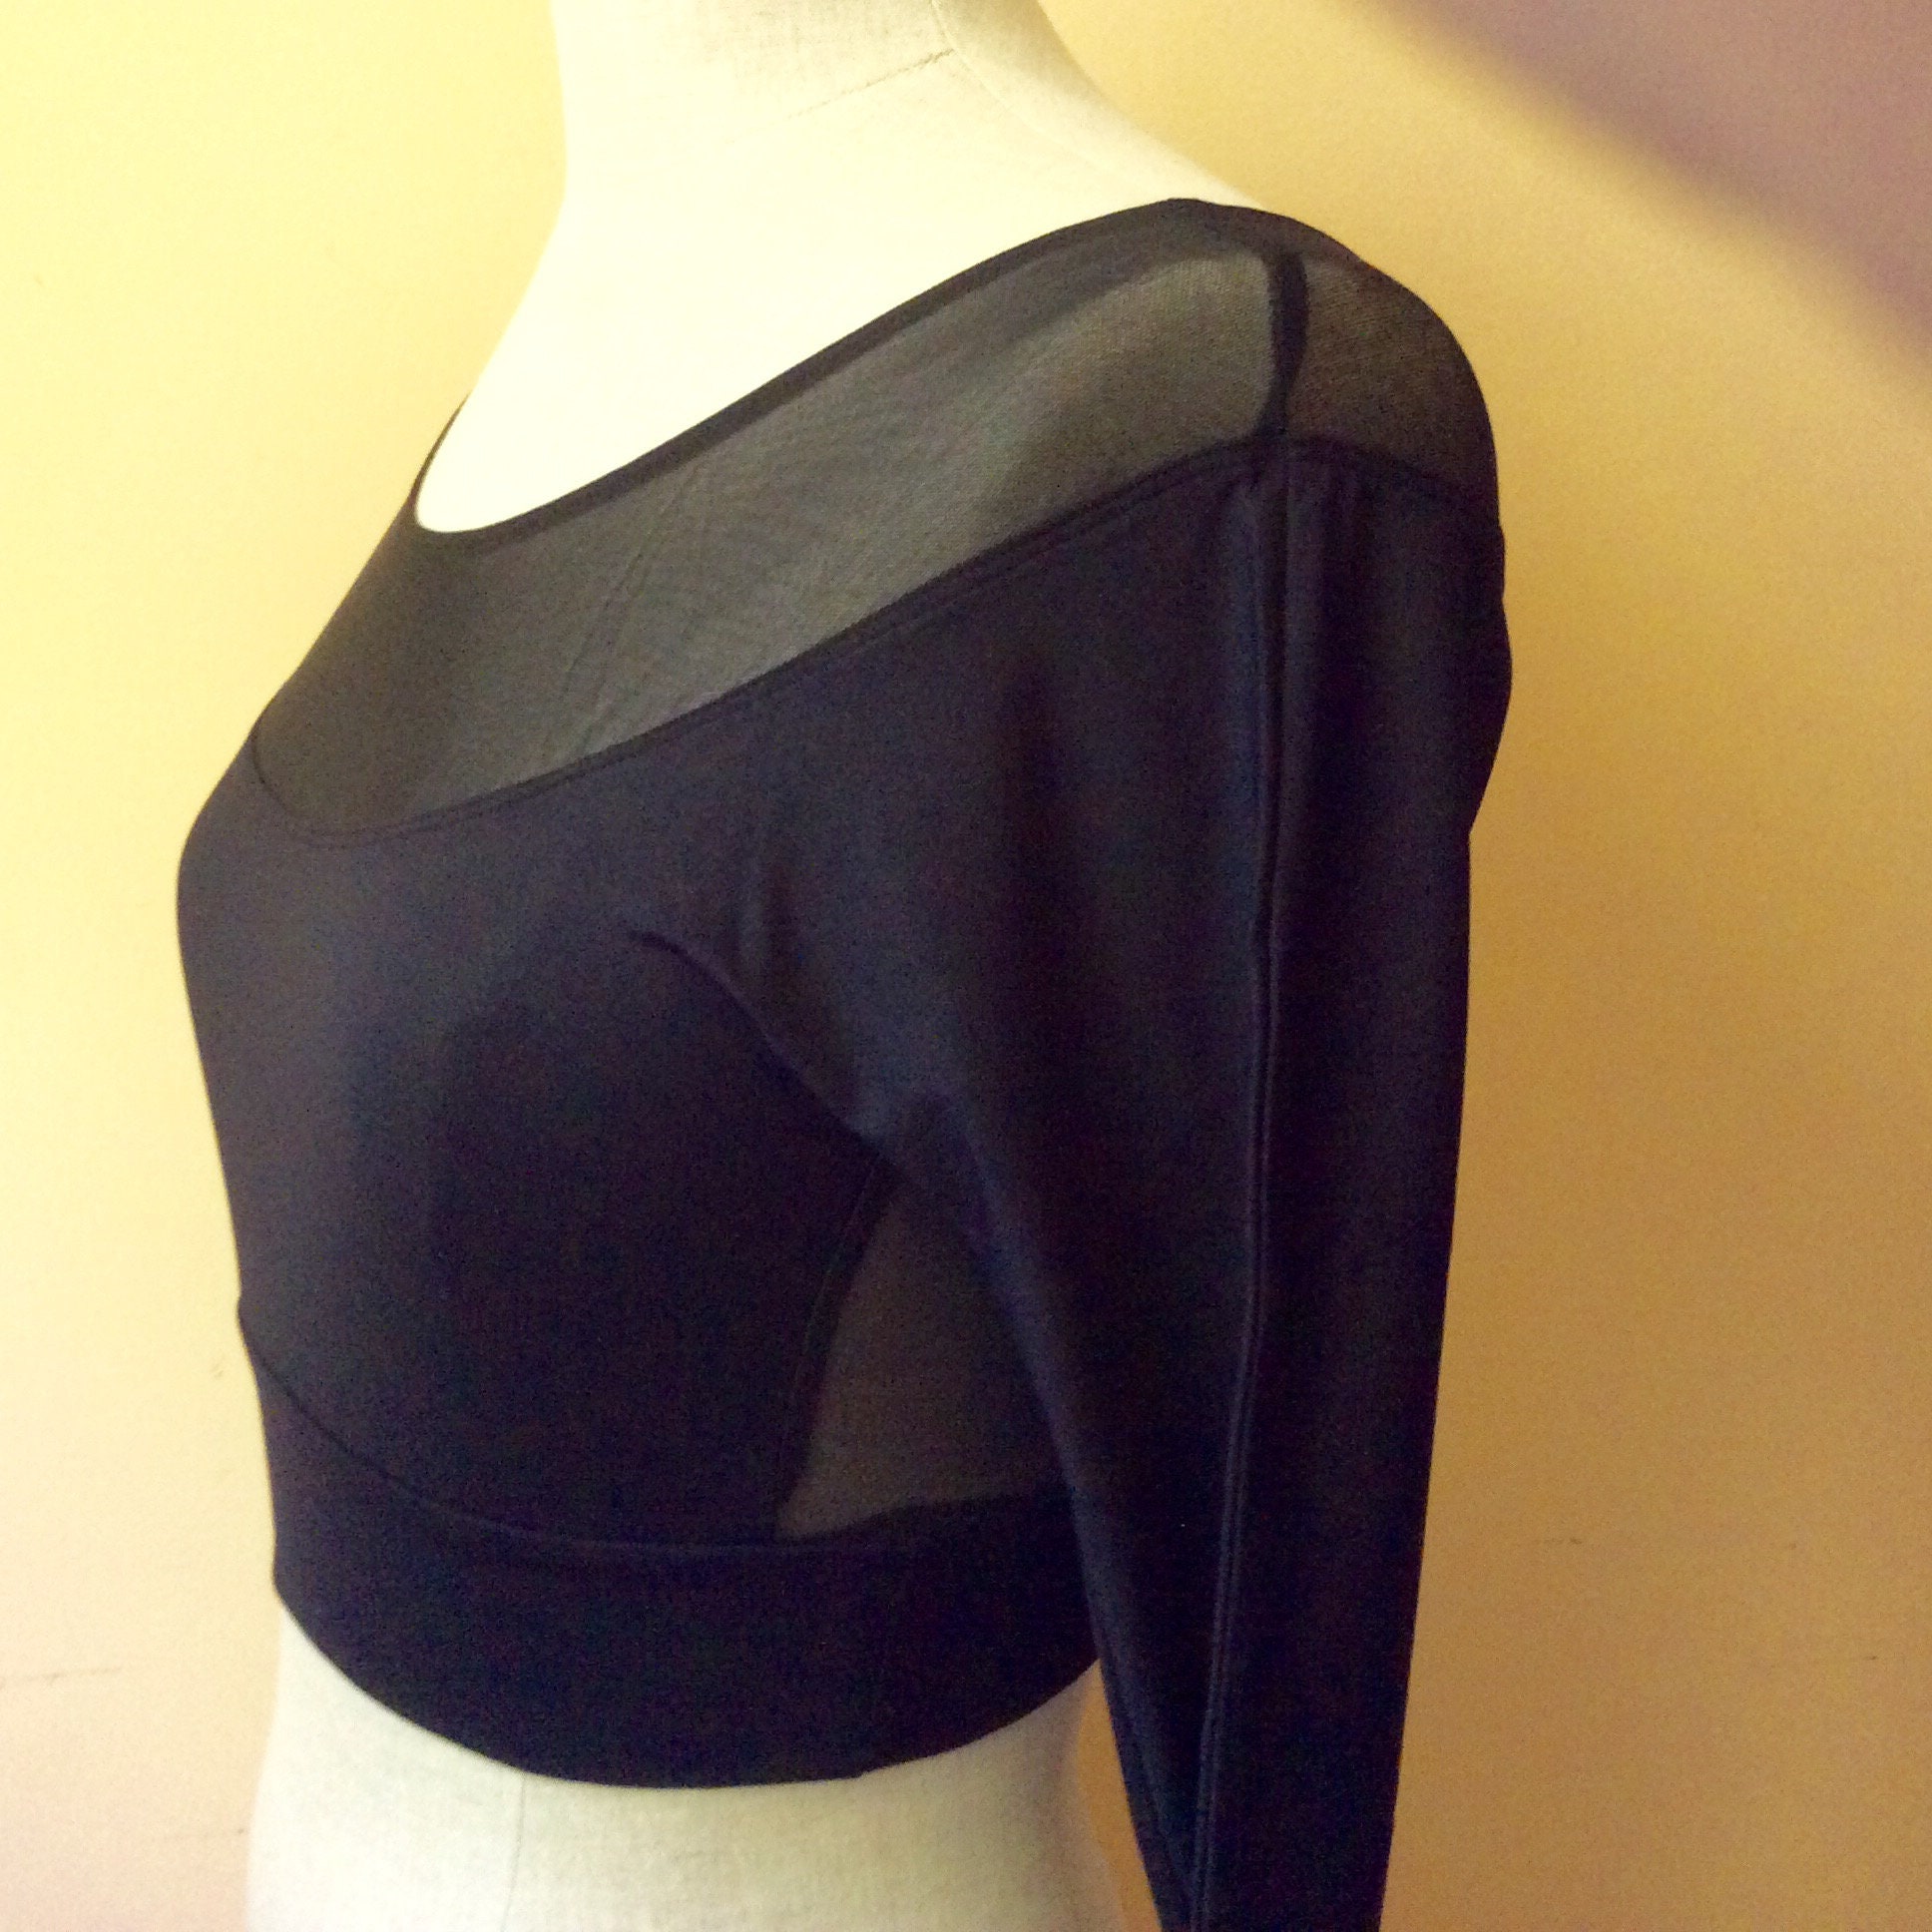 Long Sleeve Crop Top with Stretch Tulle and Verona Elegant | Etsy